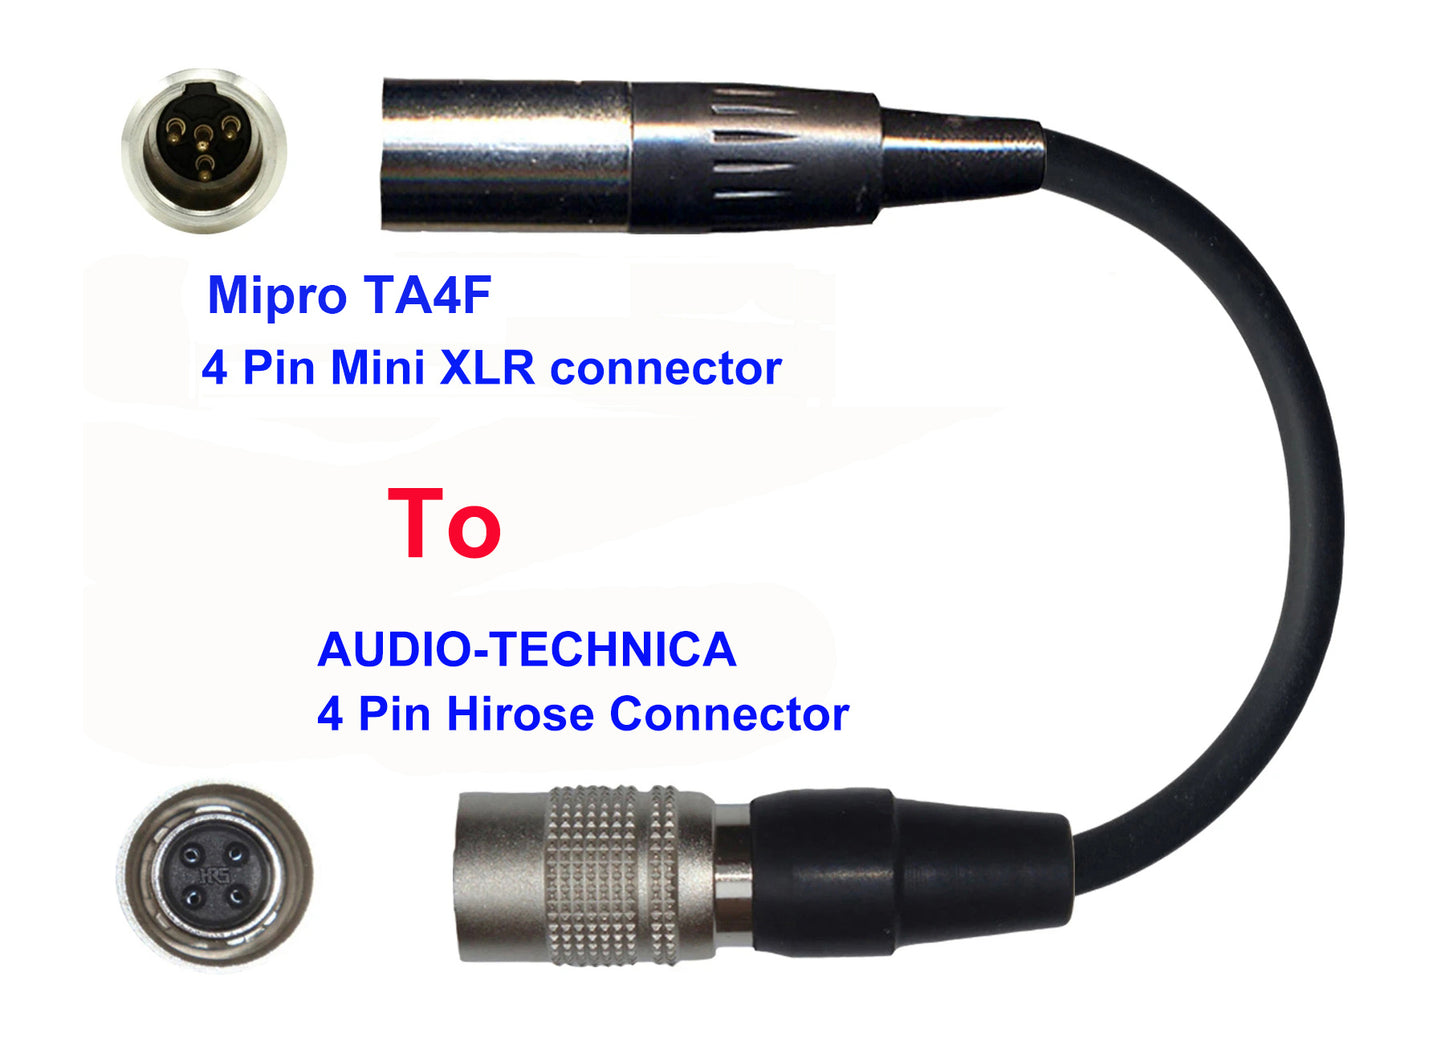 Microphone Adapter - Mipro Microphones with TA4F 4 pin mini XLR Locking connector TO Audio-Technica Transmitters with 4 pin TA4M connector